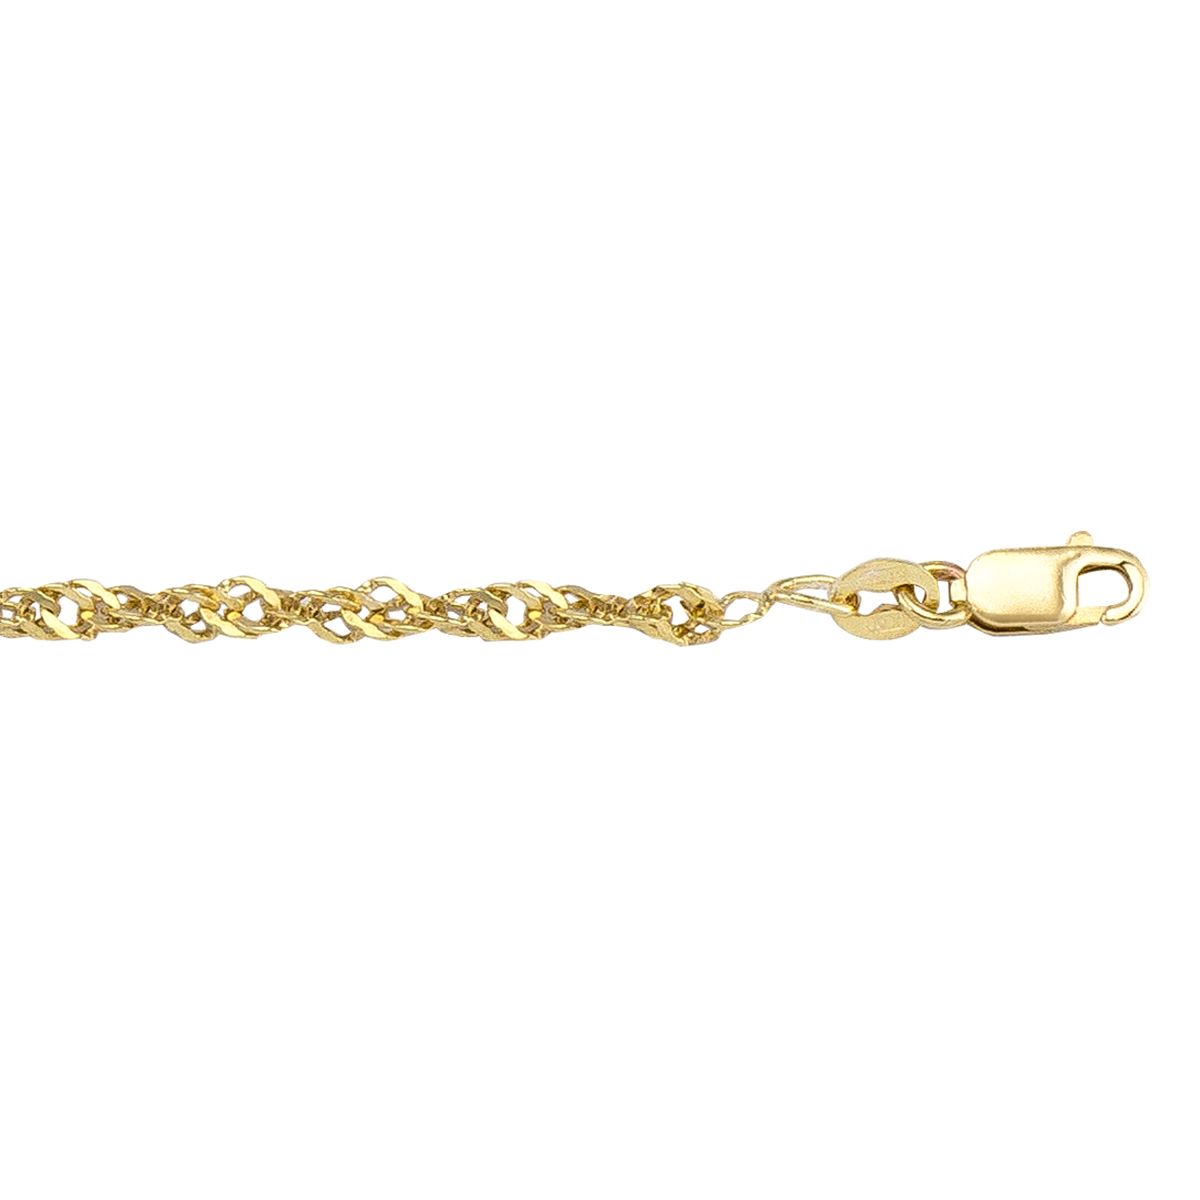 ASGP01, Gold Anklet, Singapore, Yellow Gold